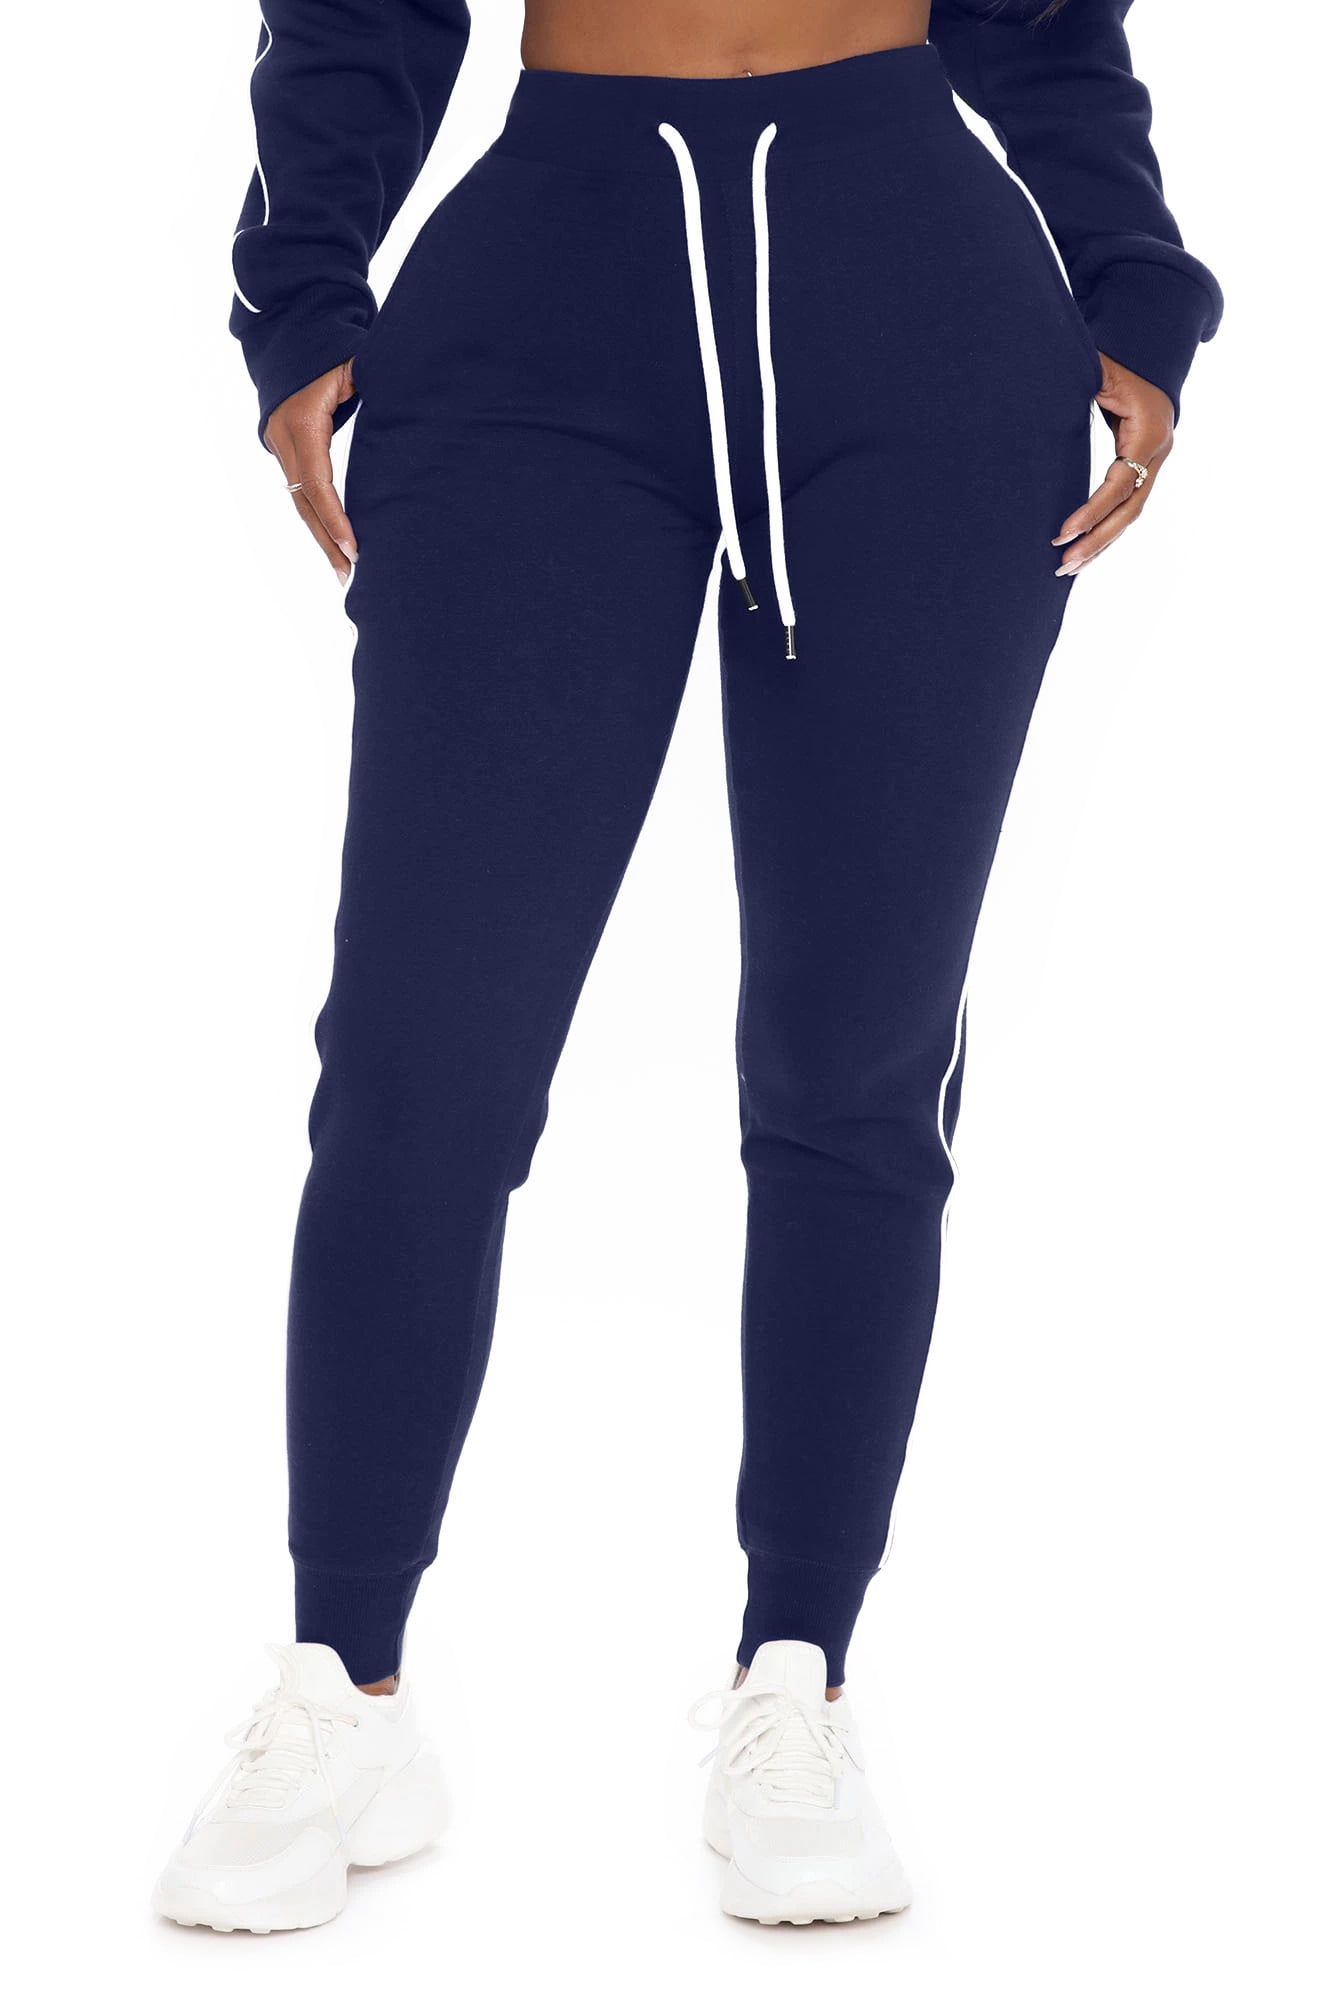 Dragon Fit Joggers for Women with Pockets,High Waist Workout Yoga Tapered  Sweatpants Women's Lounge Pants, Joggers78-demin Blue, Medium :  : Fashion